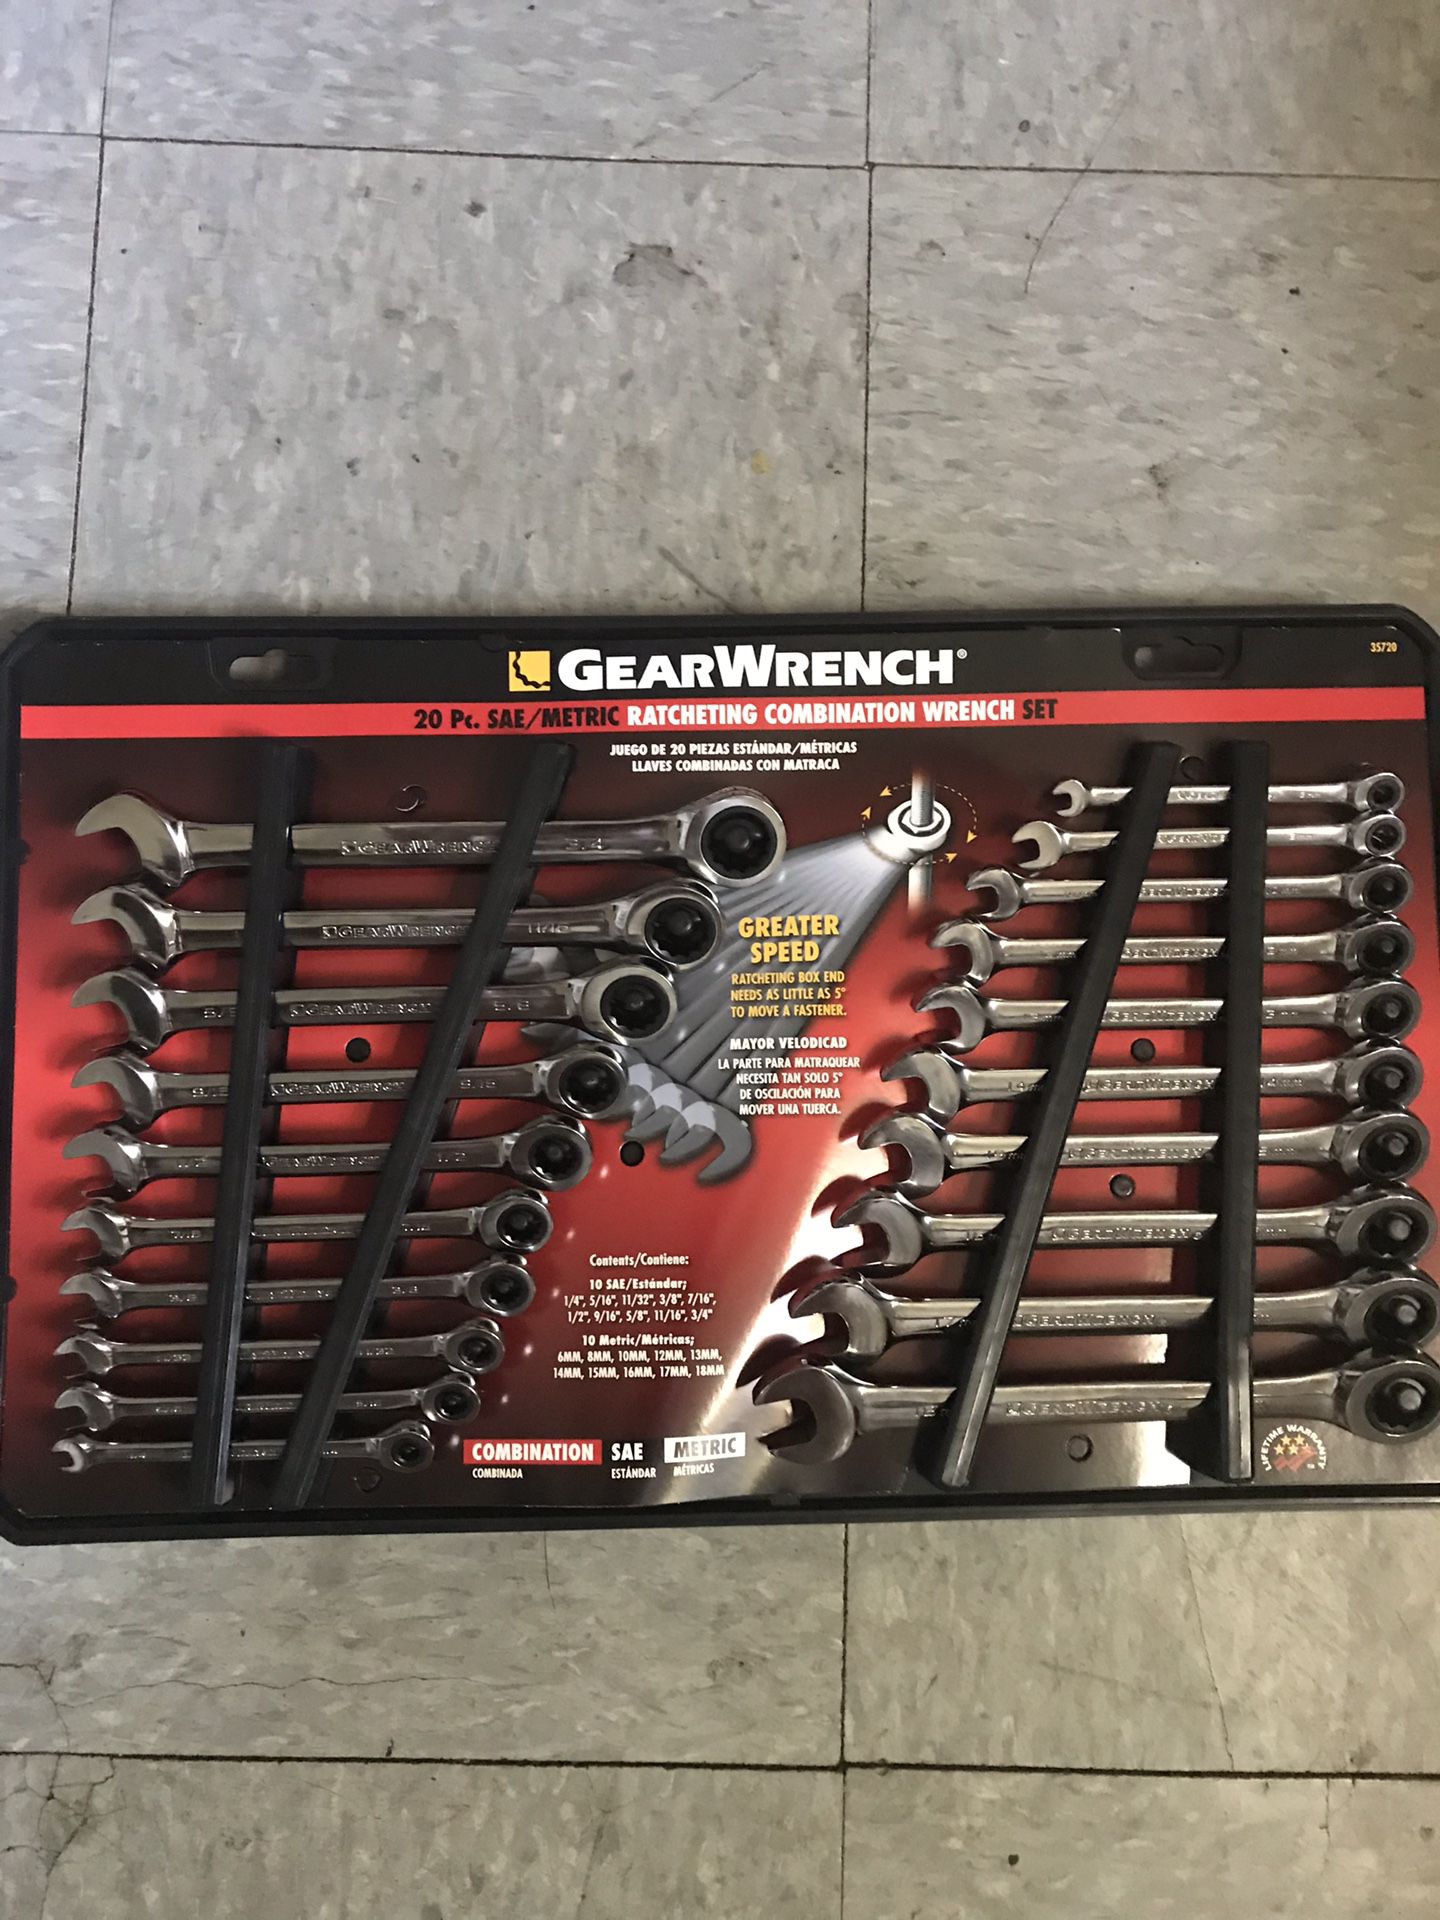 Gearwrench 20 piece ratcheting wrench brand new. $40.